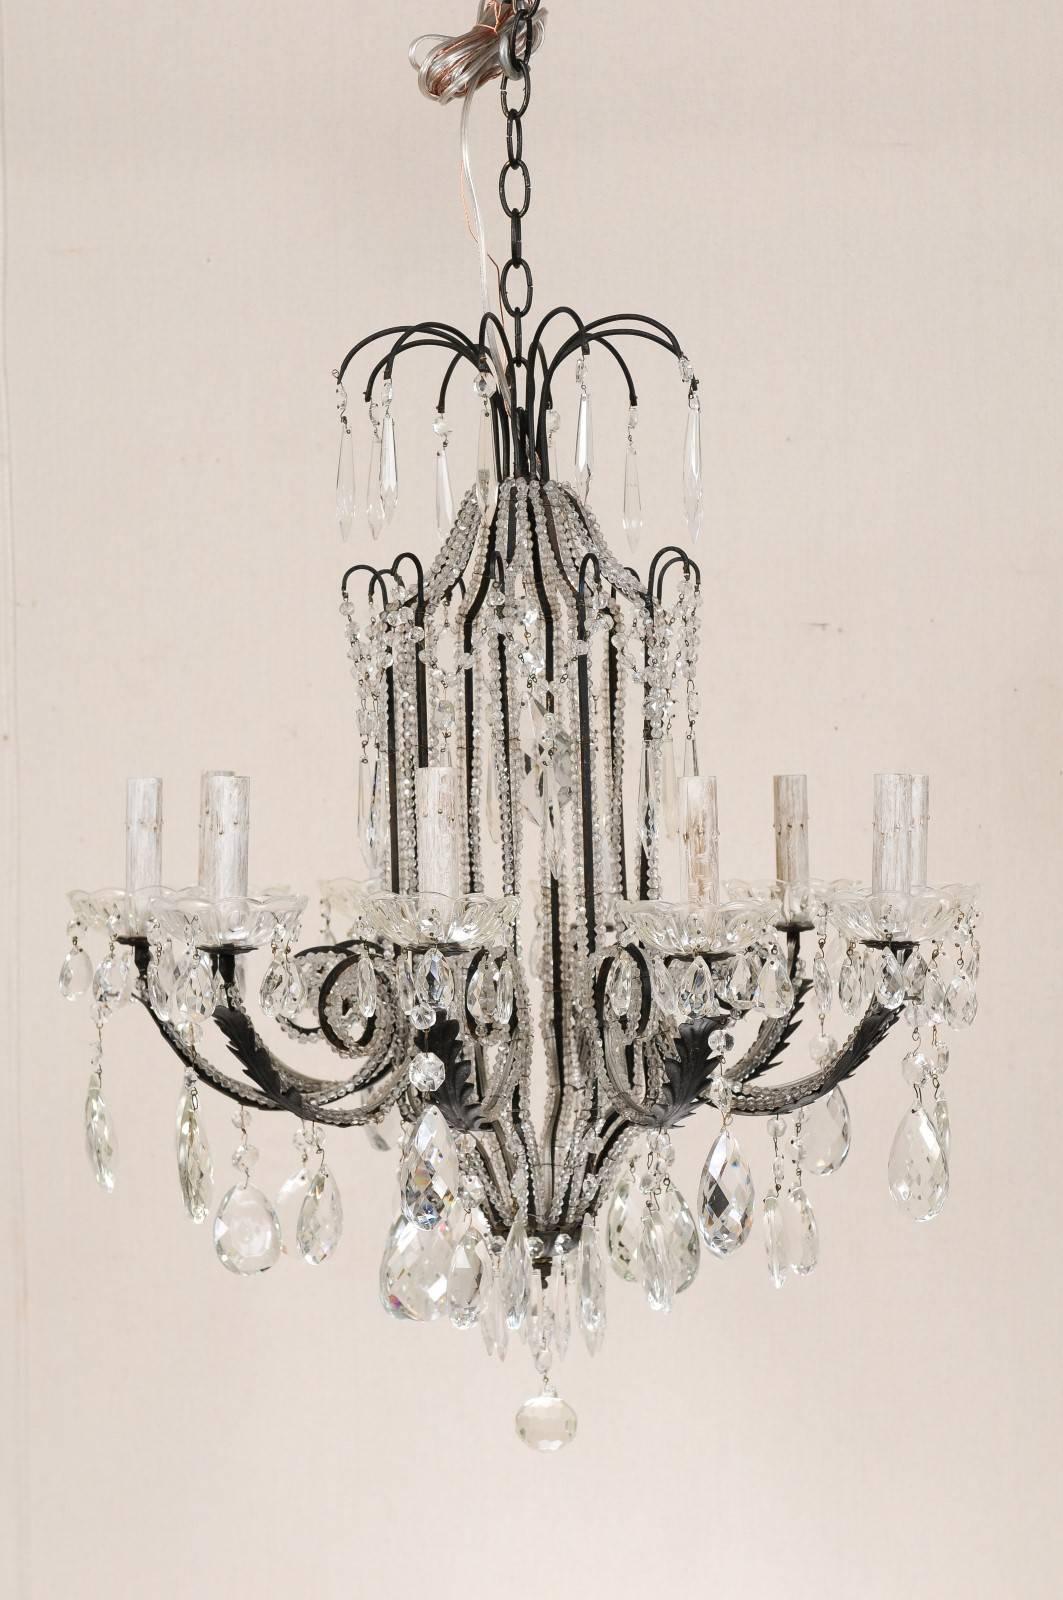 An Italian ten-light crystal and wrought iron chandelier. This Italian mid-20th century chandelier of black wrought iron is outlined along the body and arms with Italian bead-like glass trim. There is a crystal waterfall crown and hanging finial at